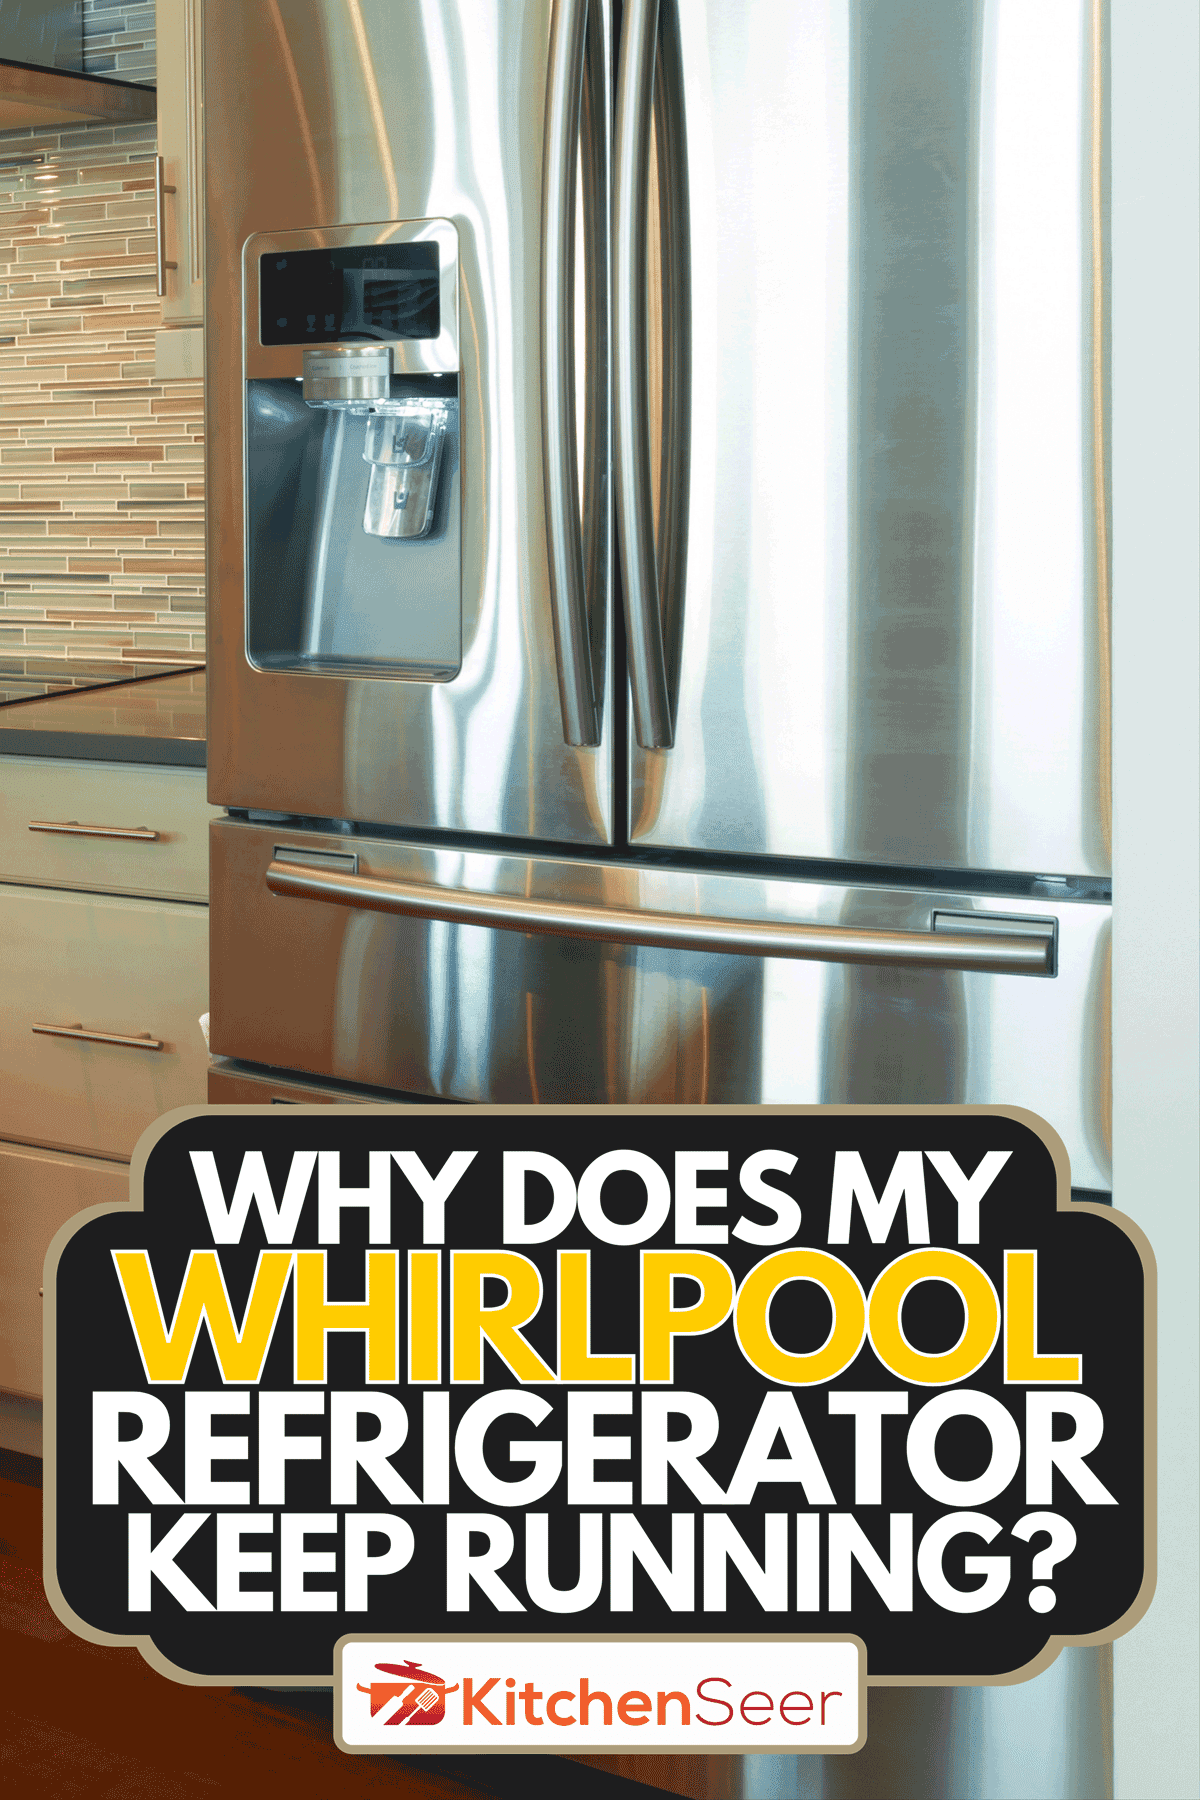 Refrigerator in a modern kitchen of a new house, Why Does My Whirlpool Refrigerator Keep Running?